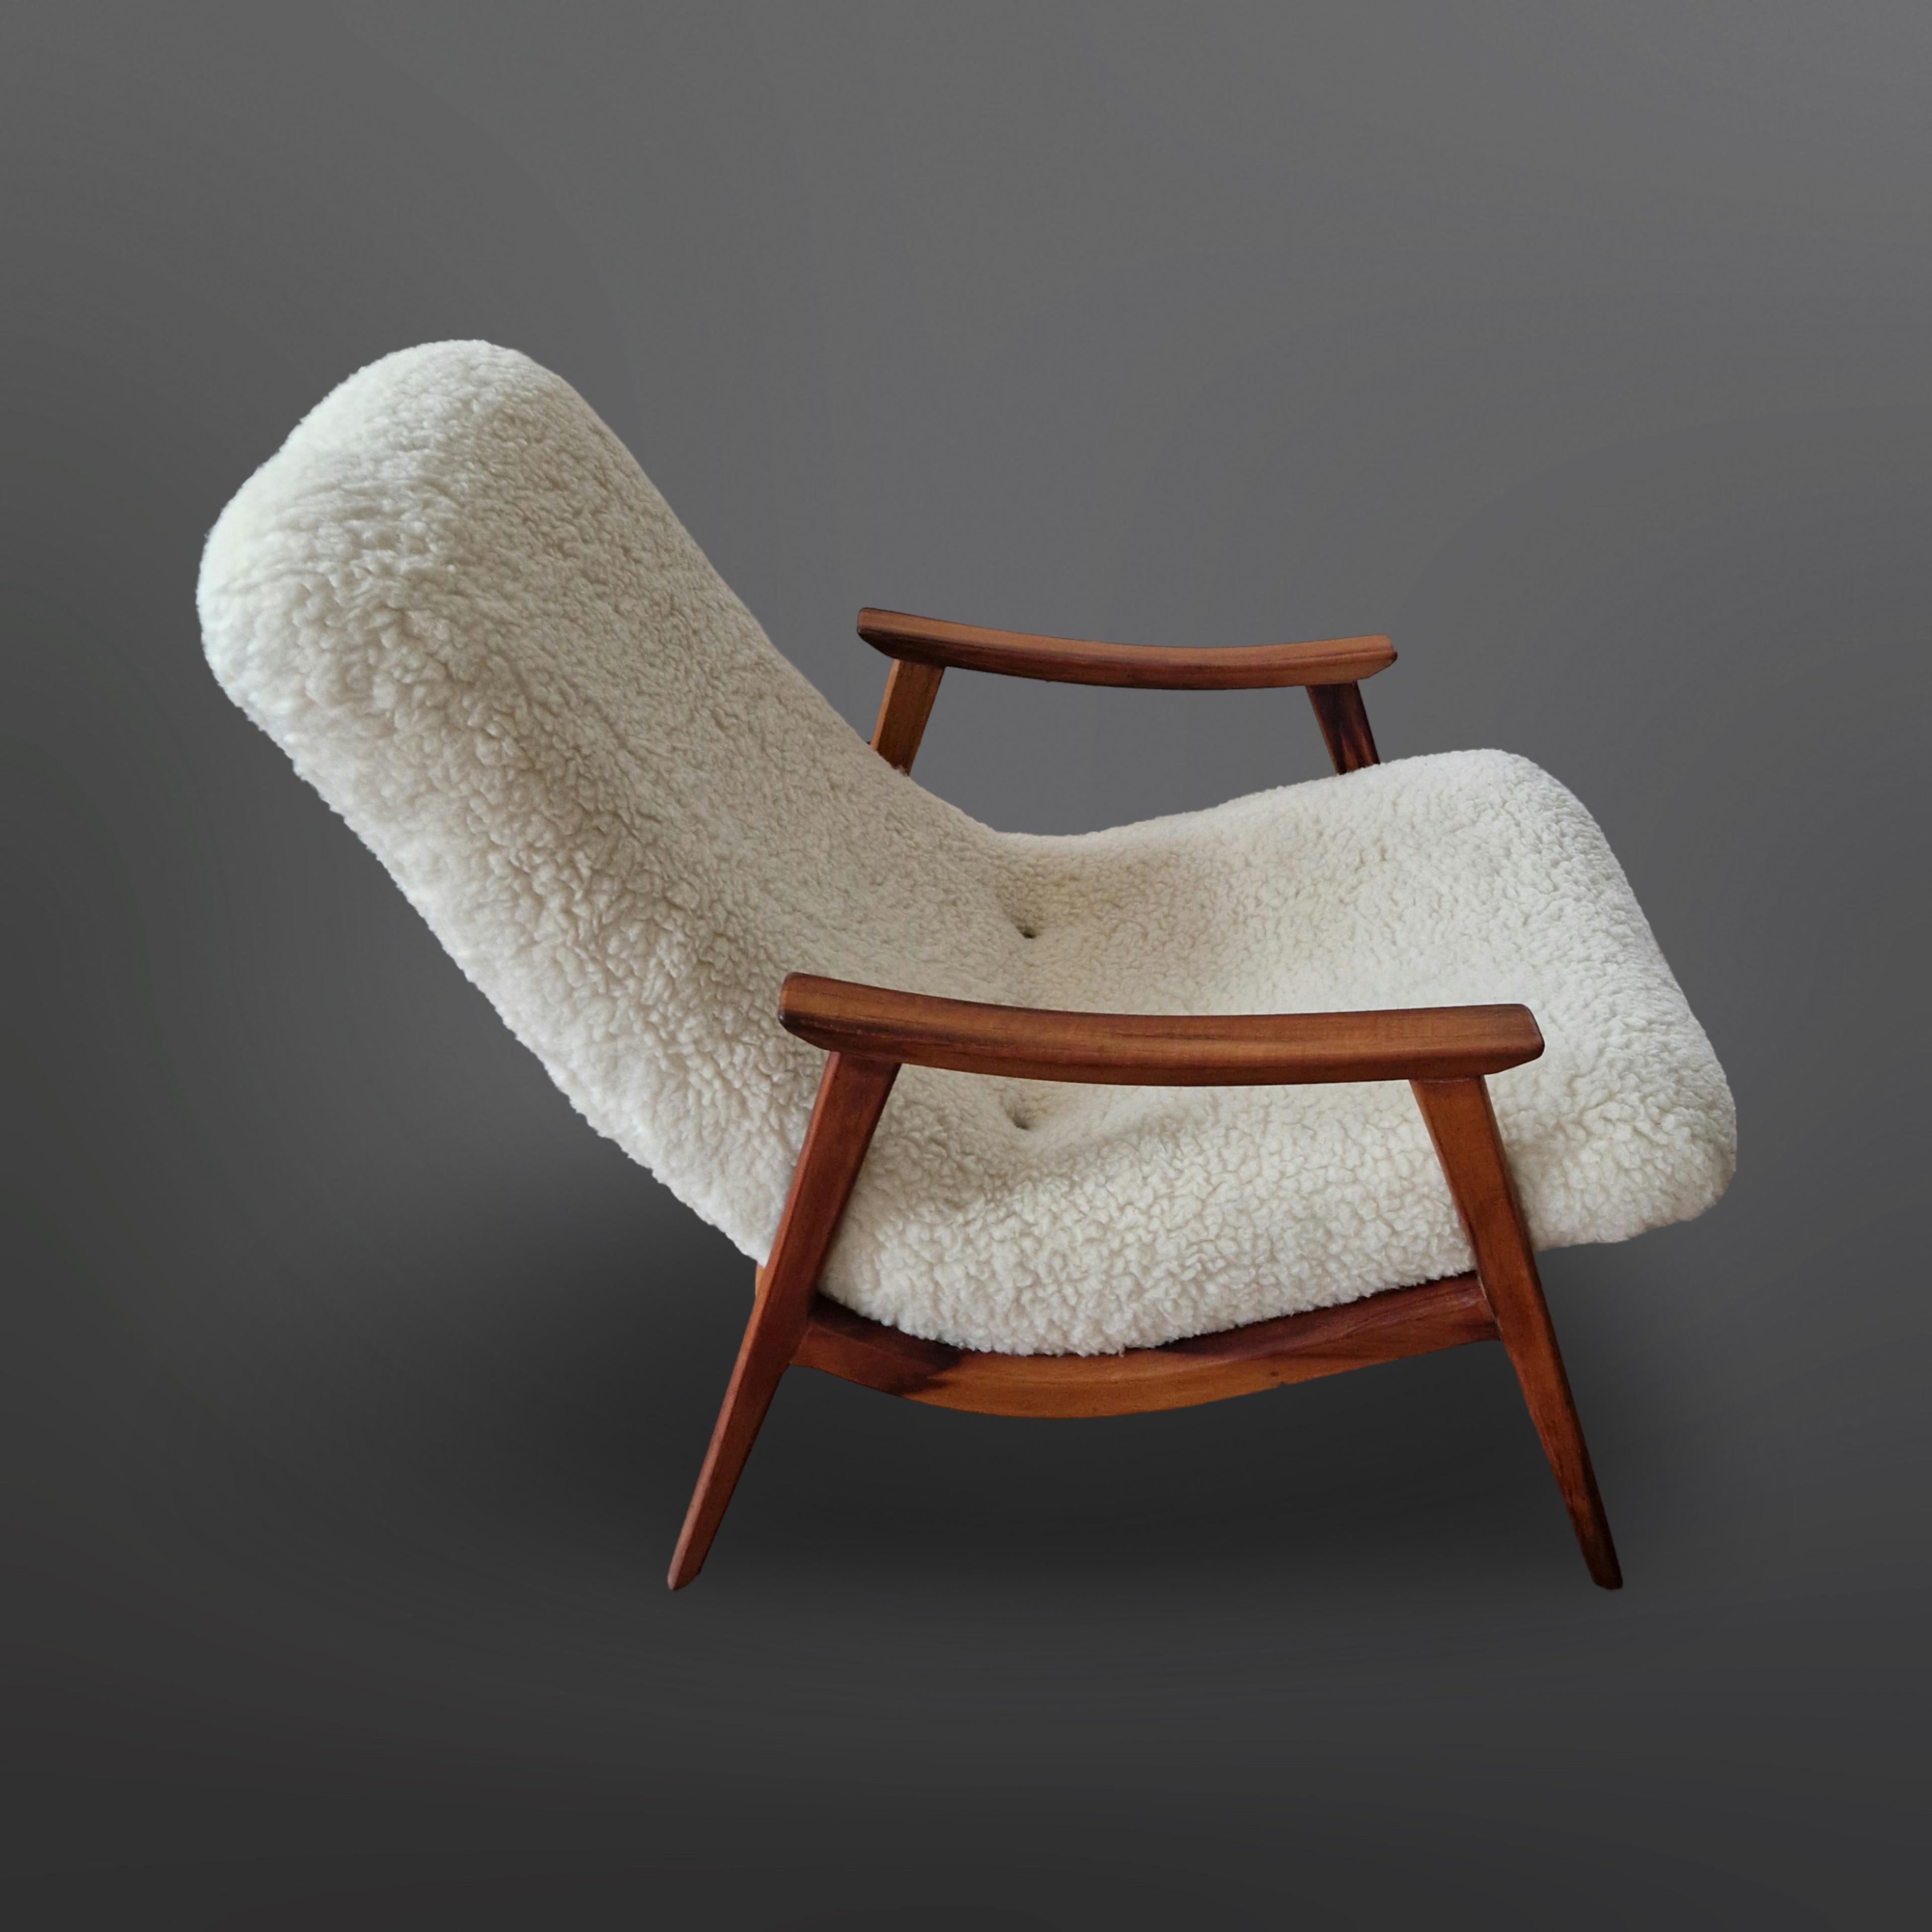 20th Century Mid century rosewood lounge chair by Gelli, Brazil 1950s